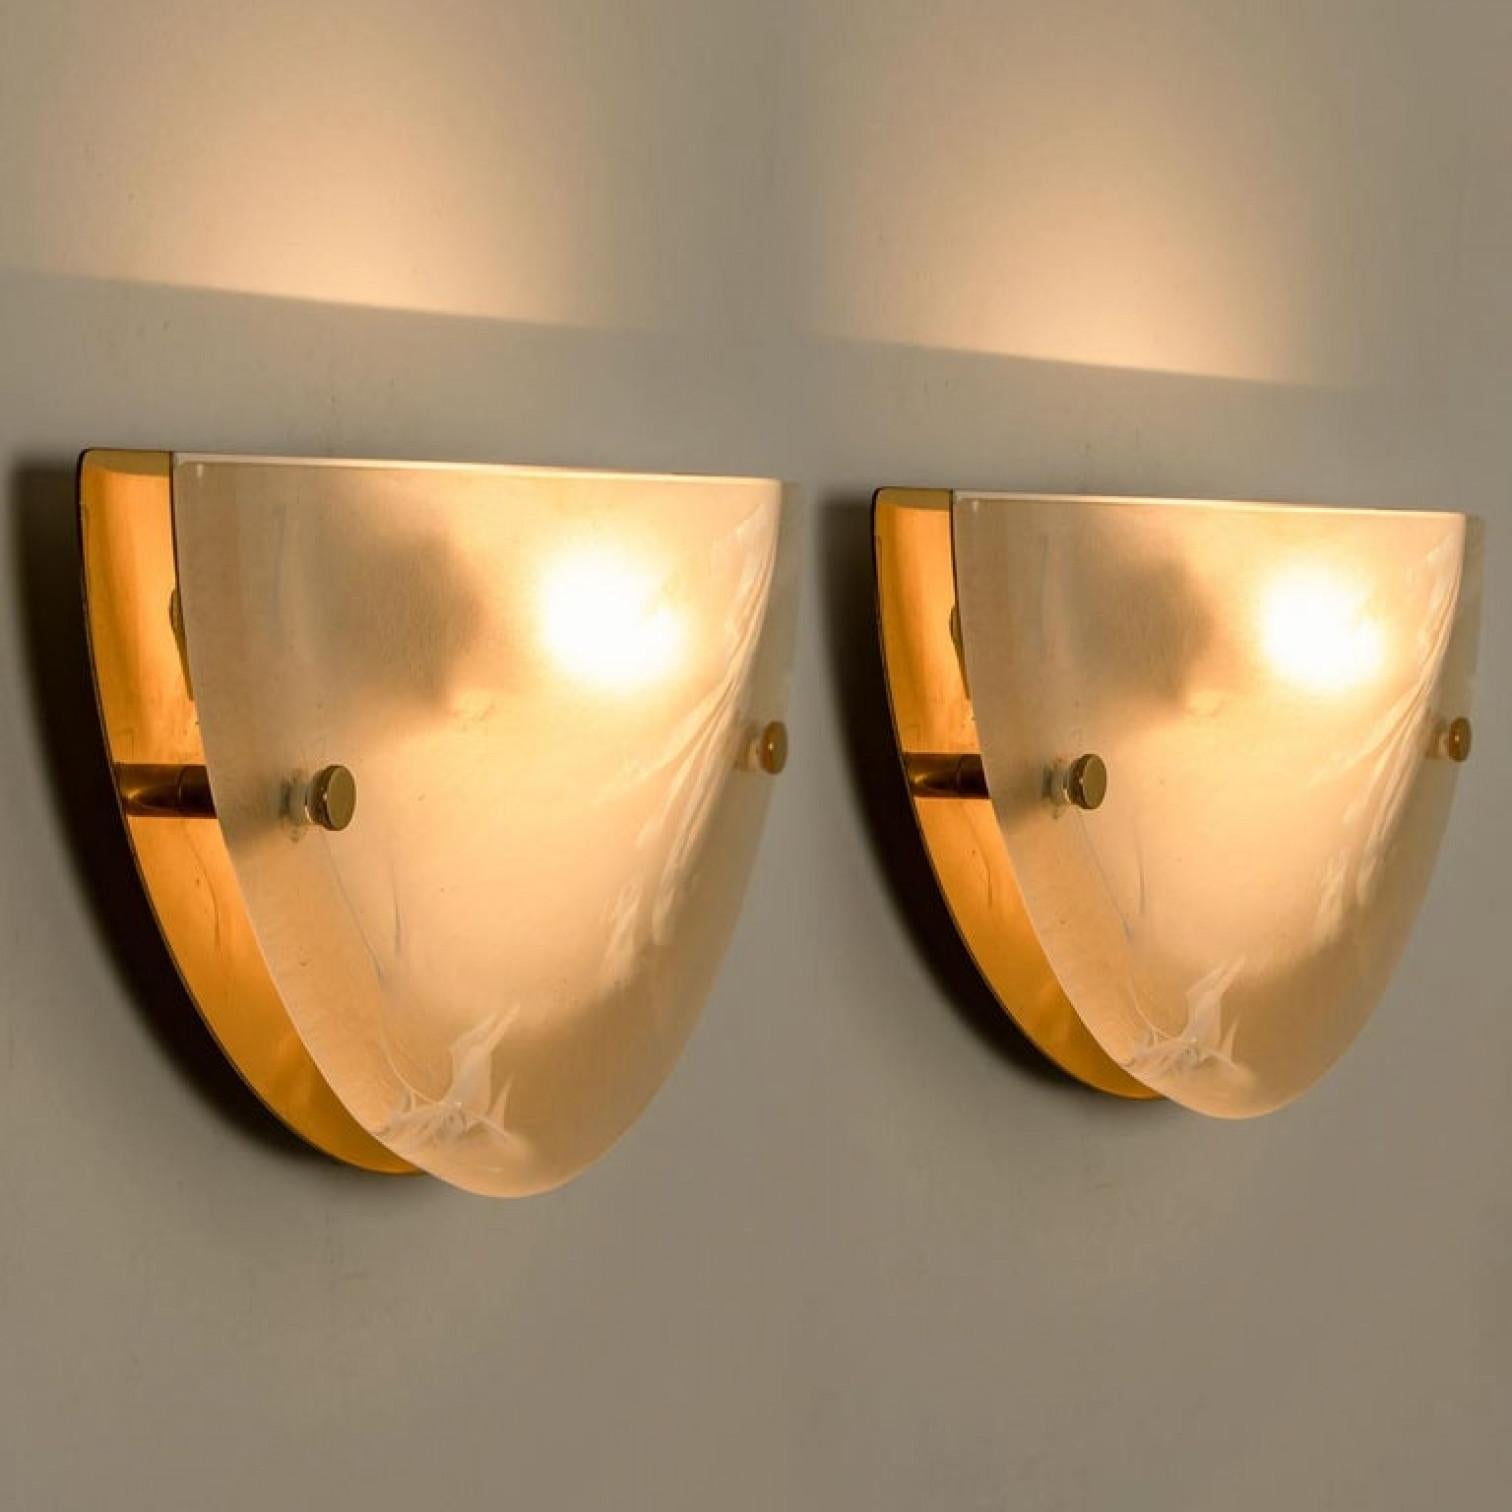 Mid-Century Modern 1 of the 8 Murano Brass and Glass Wall Lights, Hillebrand, 1975 For Sale